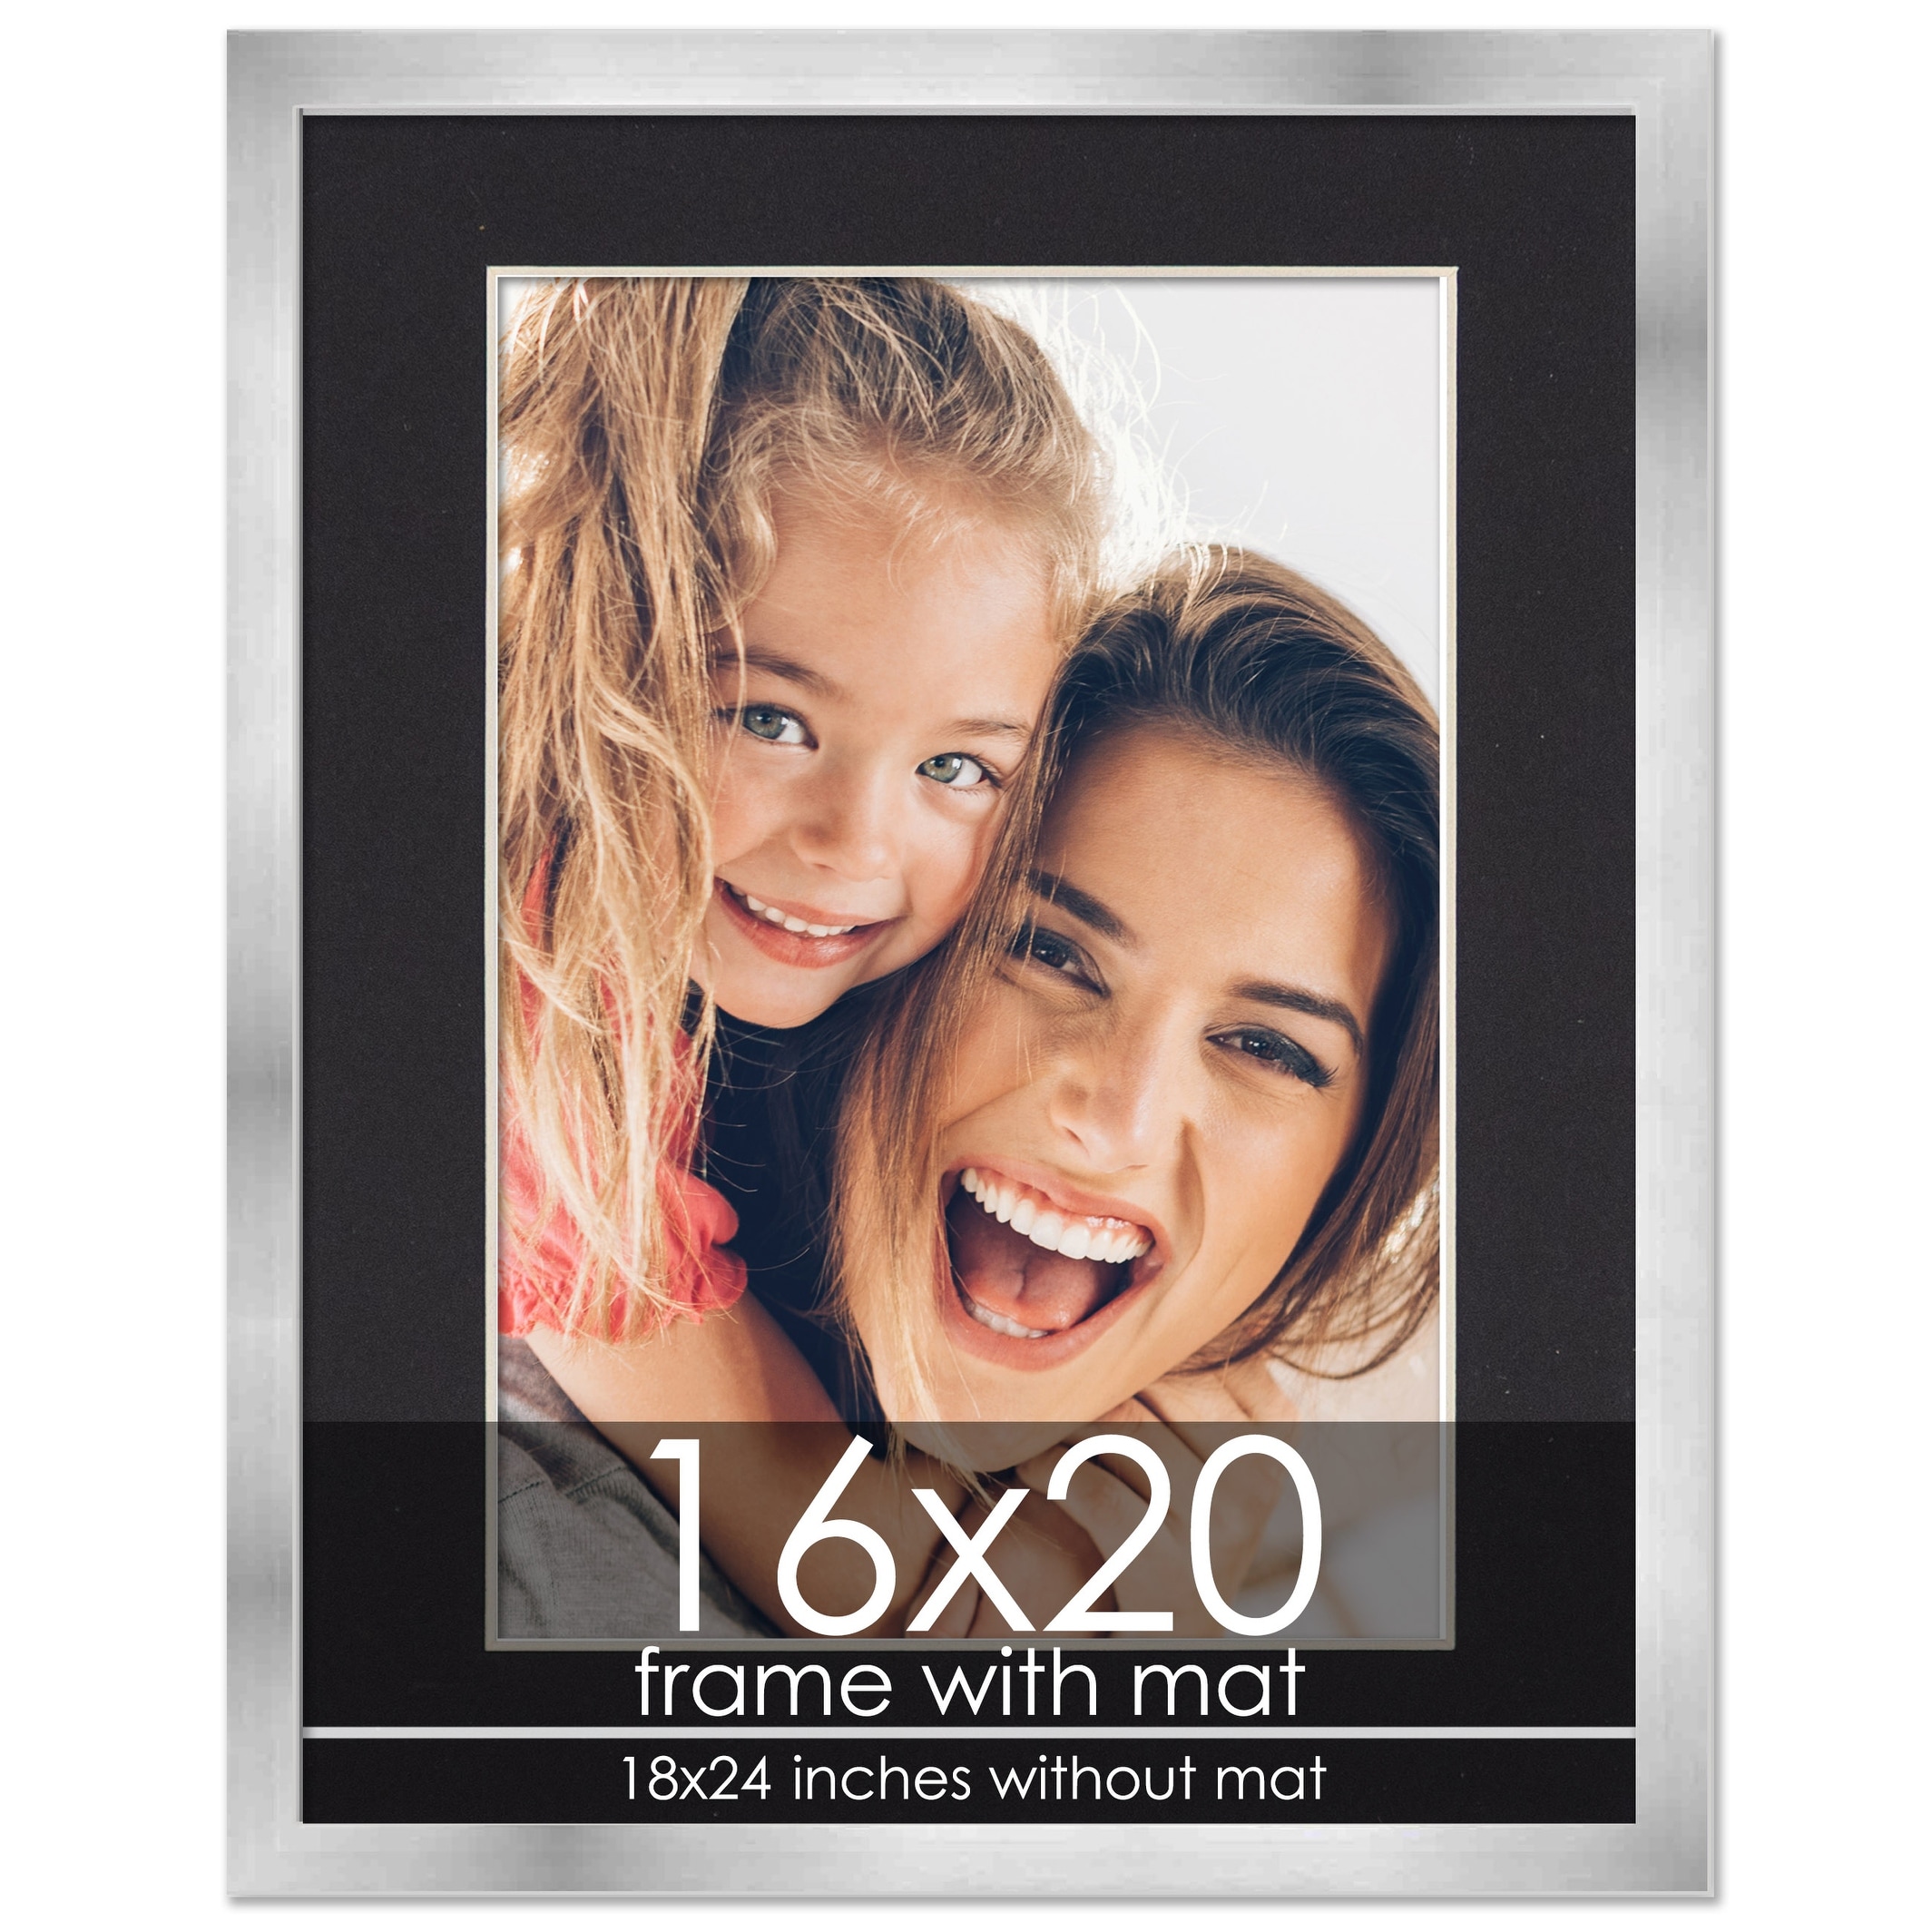 16x20 Frame with Mat - Silver 18x24 Frame Wood Made to Display Print or  Poster Measuring 16 x 20 Inches with Black Photo Mat - Bed Bath & Beyond -  38487246